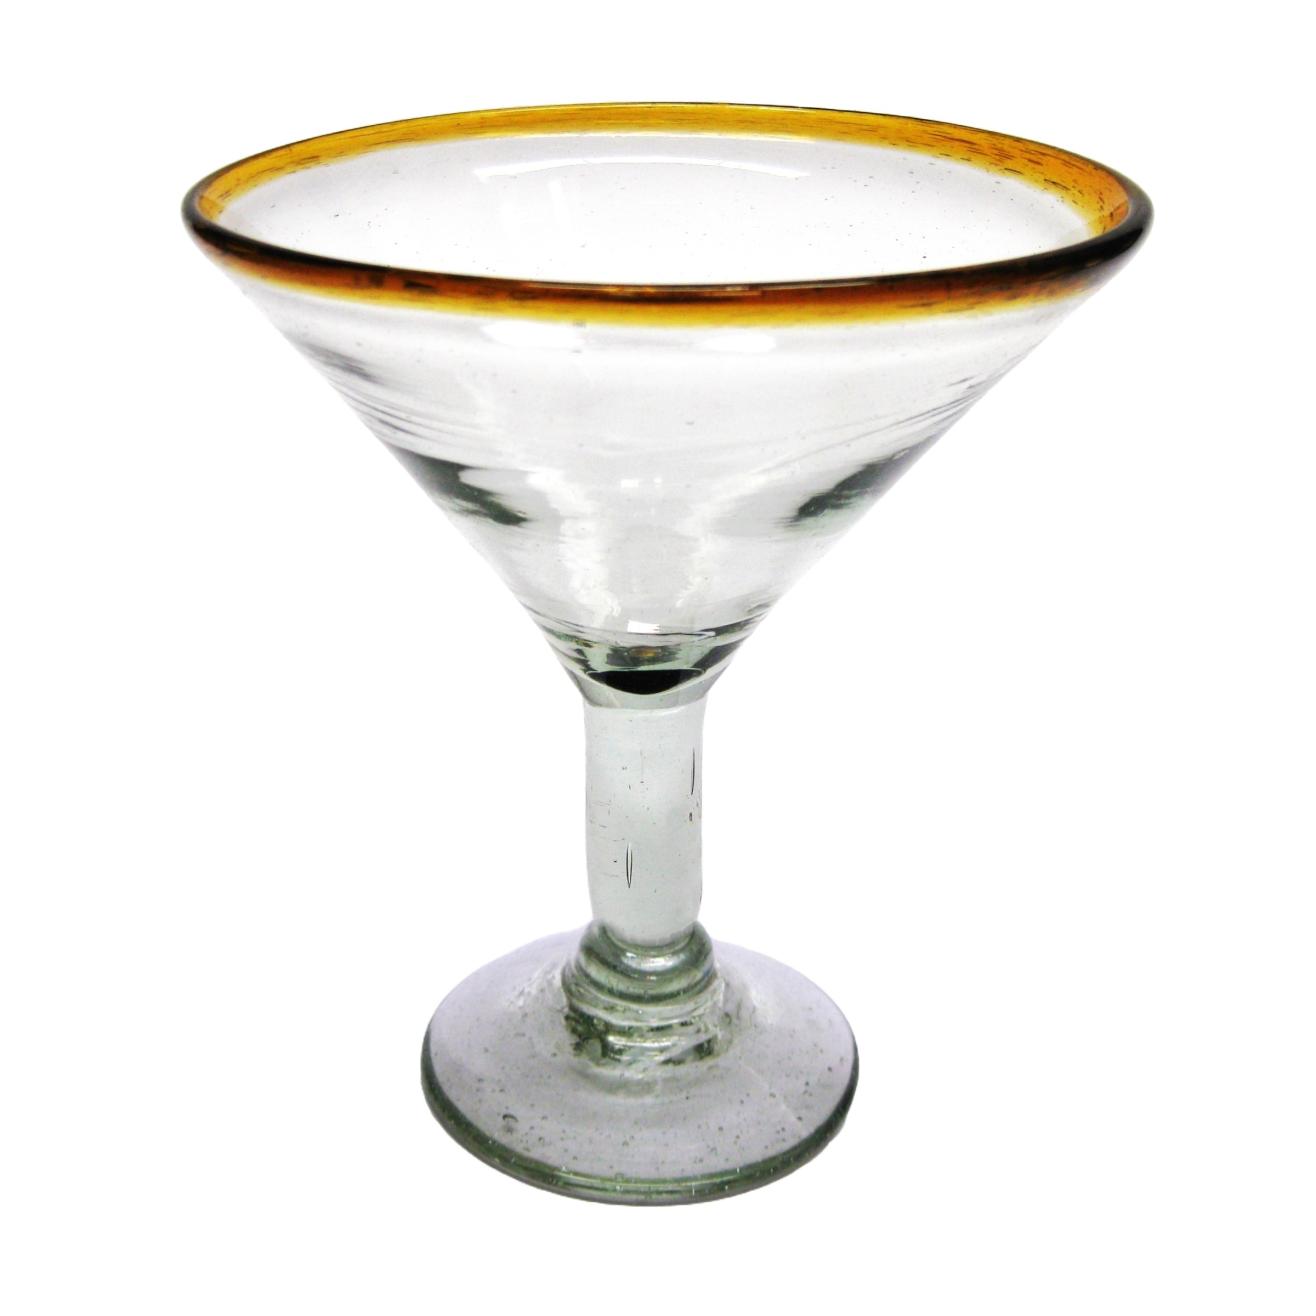 Wholesale MEXICAN GLASSWARE / Amber Rim 10 oz Martini Glasses  / This wonderful set of martini glasses will bring a classic, mexican touch to your parties.